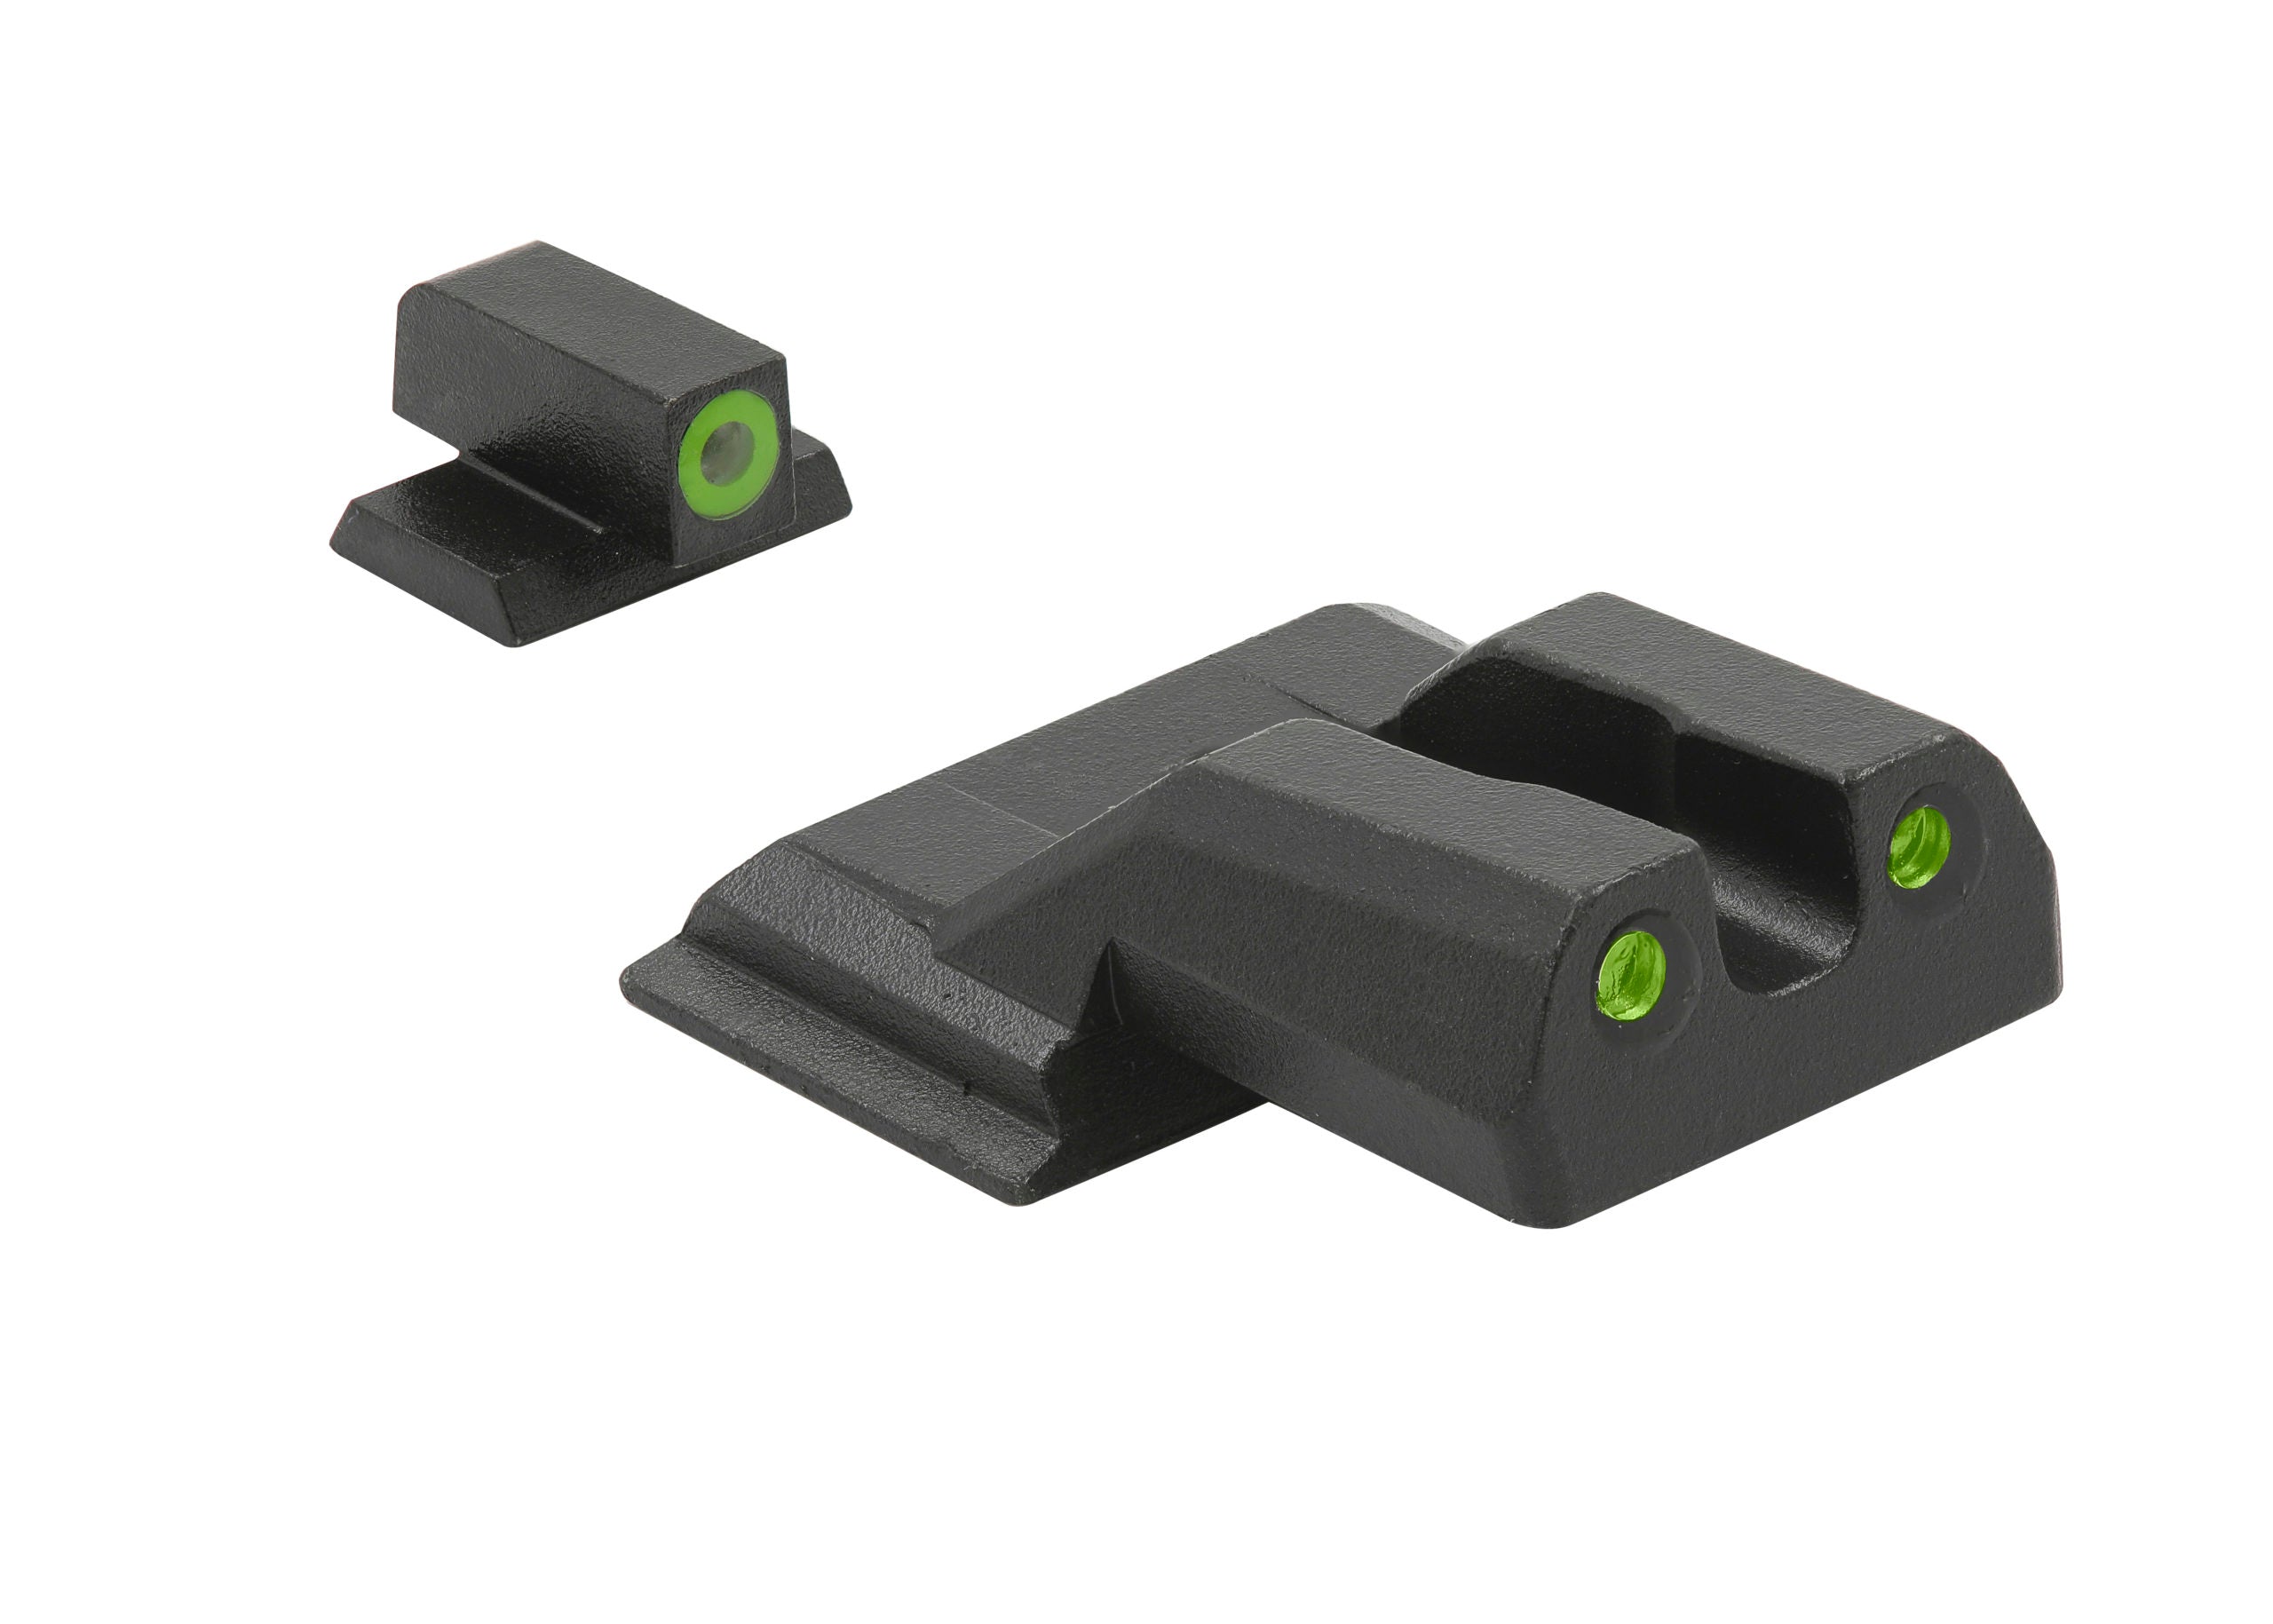 Meprolight Highly Visible Day/Night Sights (HVS) for Smith & Wesson M&P Shield - SharpShooter Optics